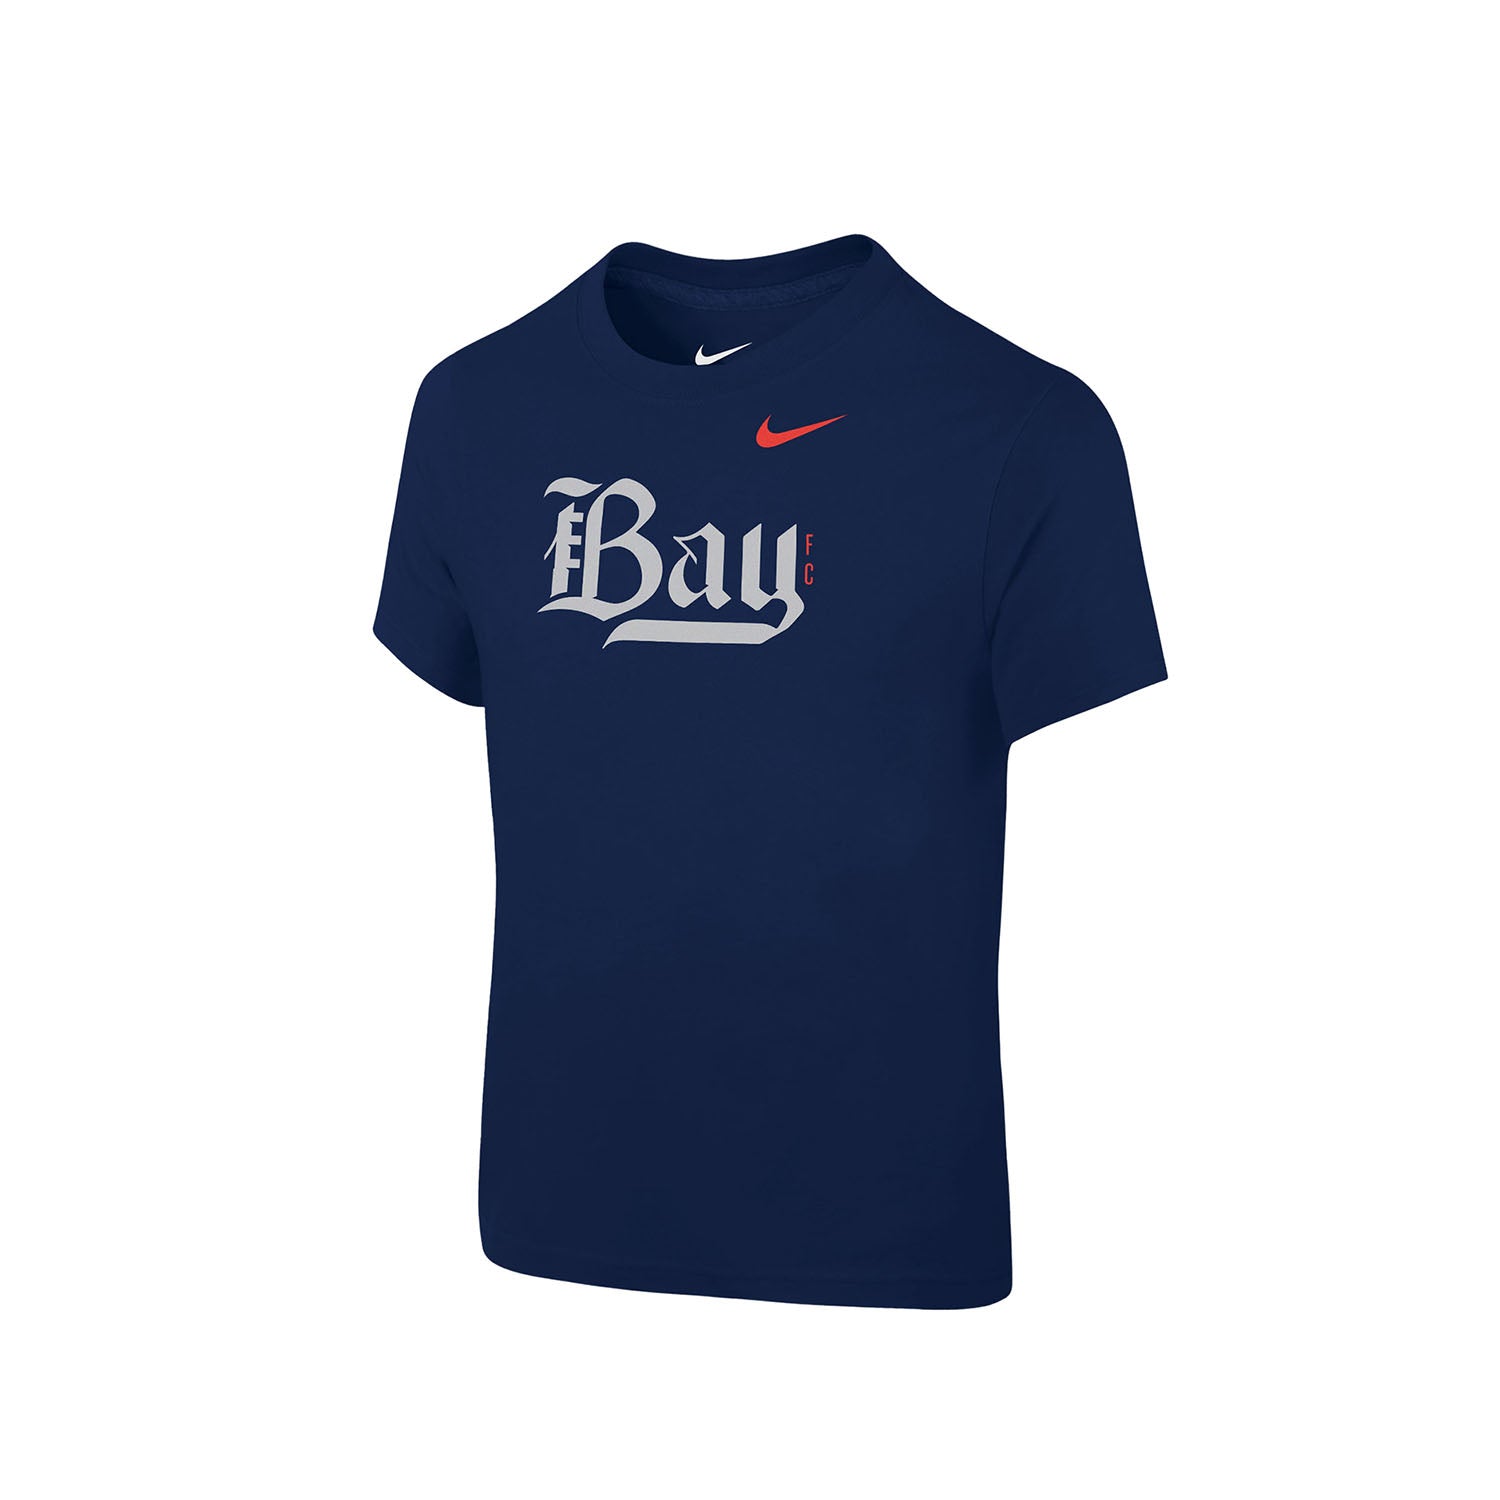 Toddler Nike Bay FC Core Navy Tee - Front View